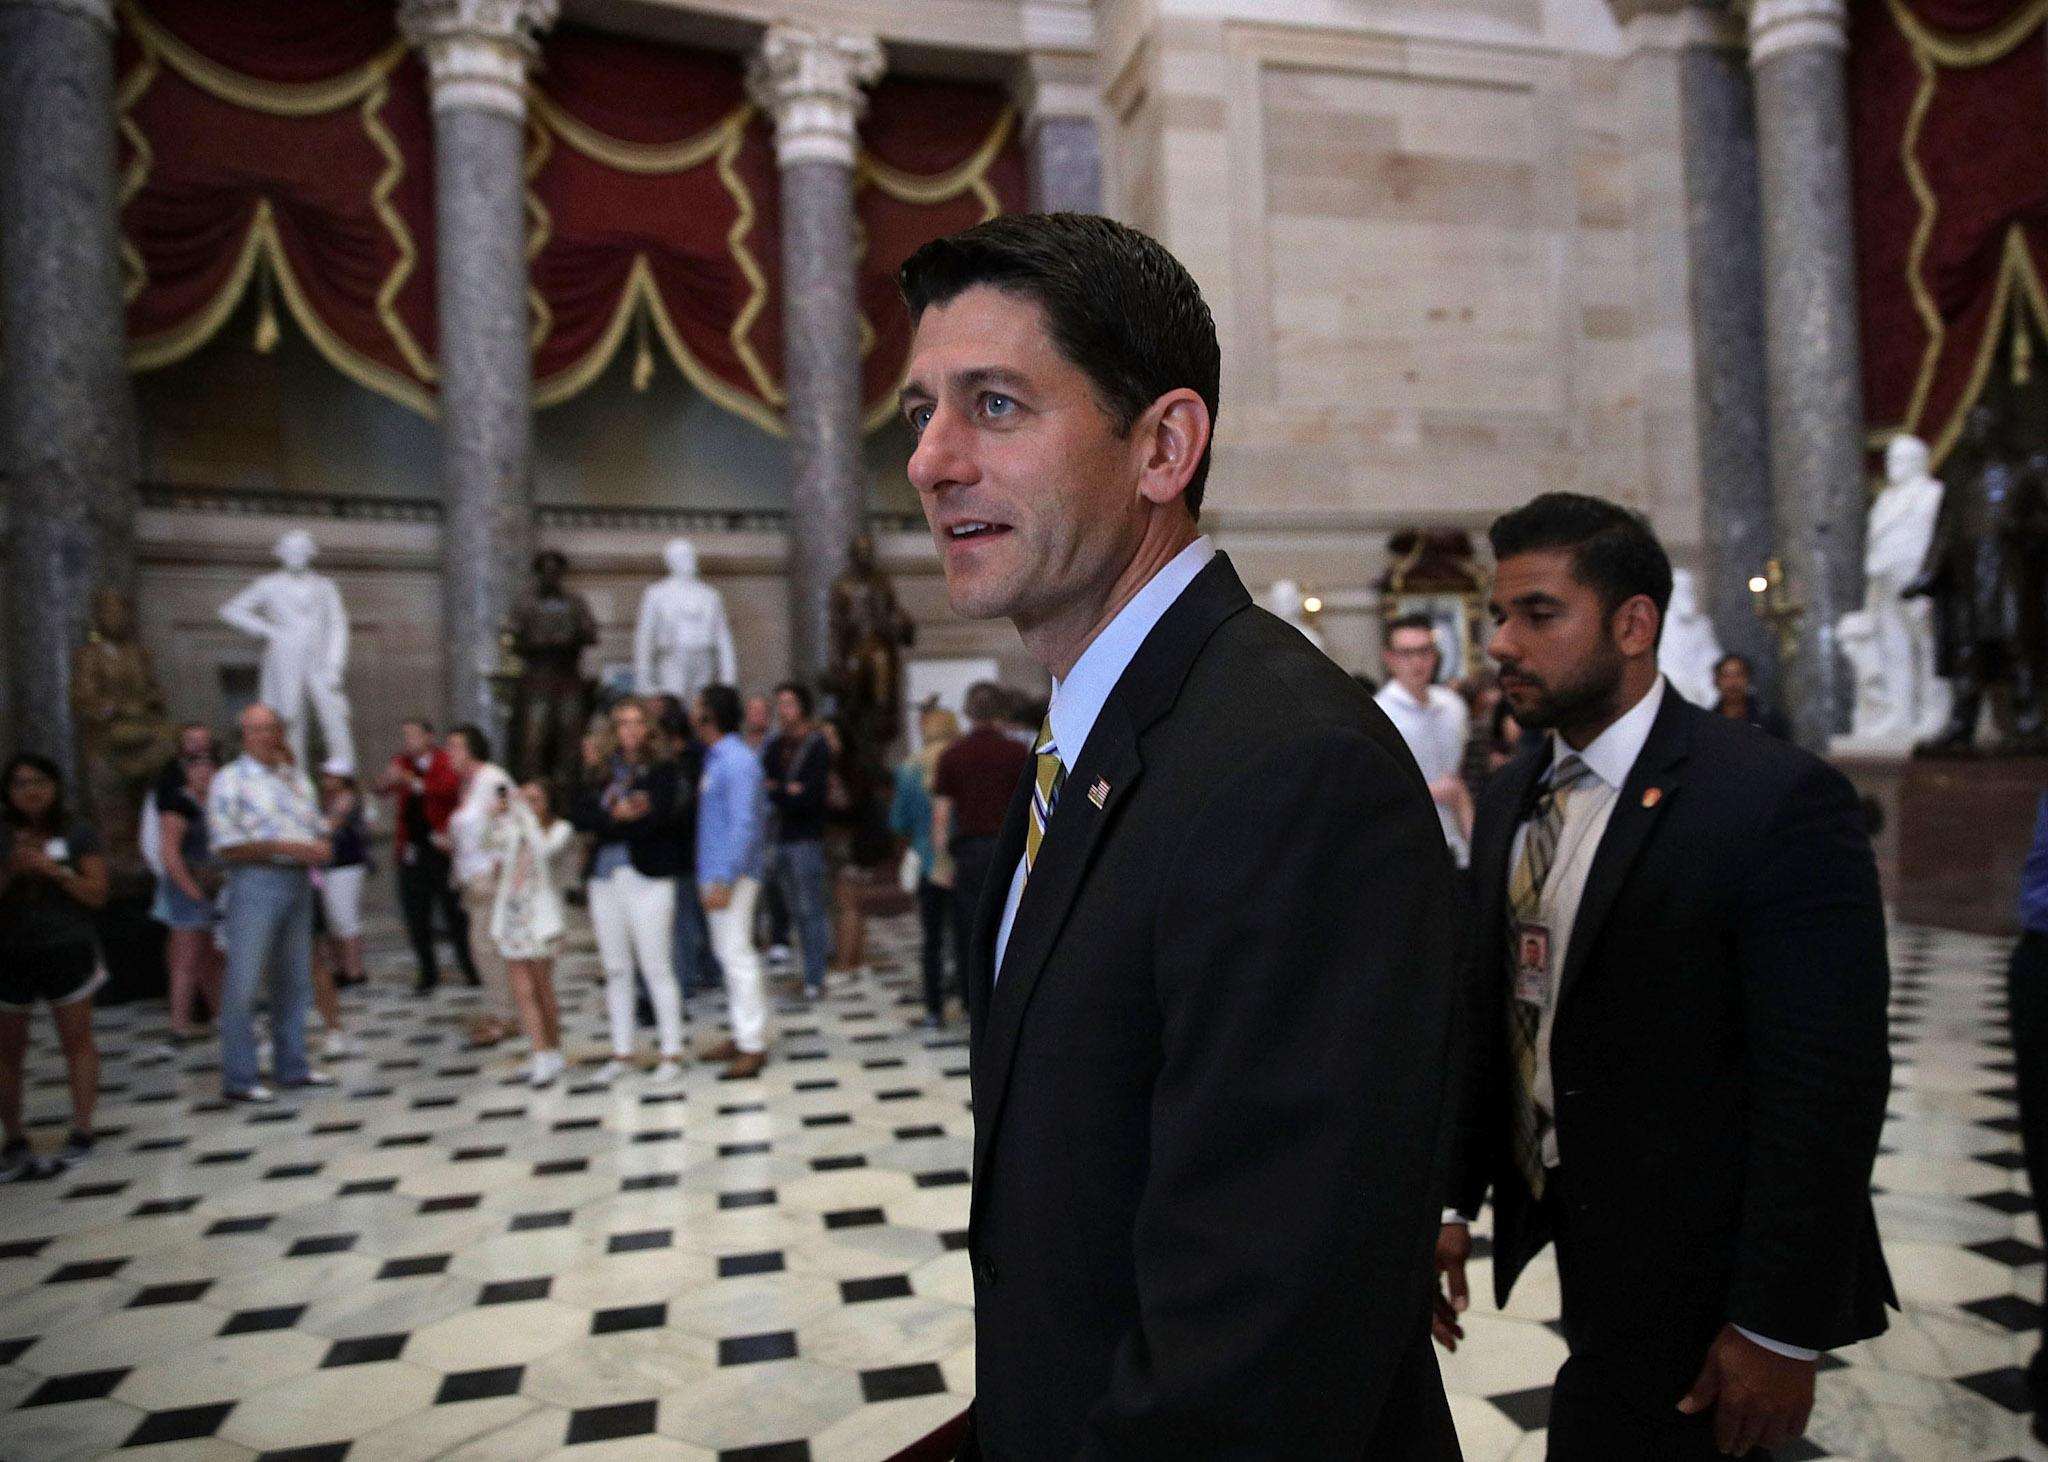 US Speaker of the House Rep. Paul Ryan returns to his office after a vote at the Capitol